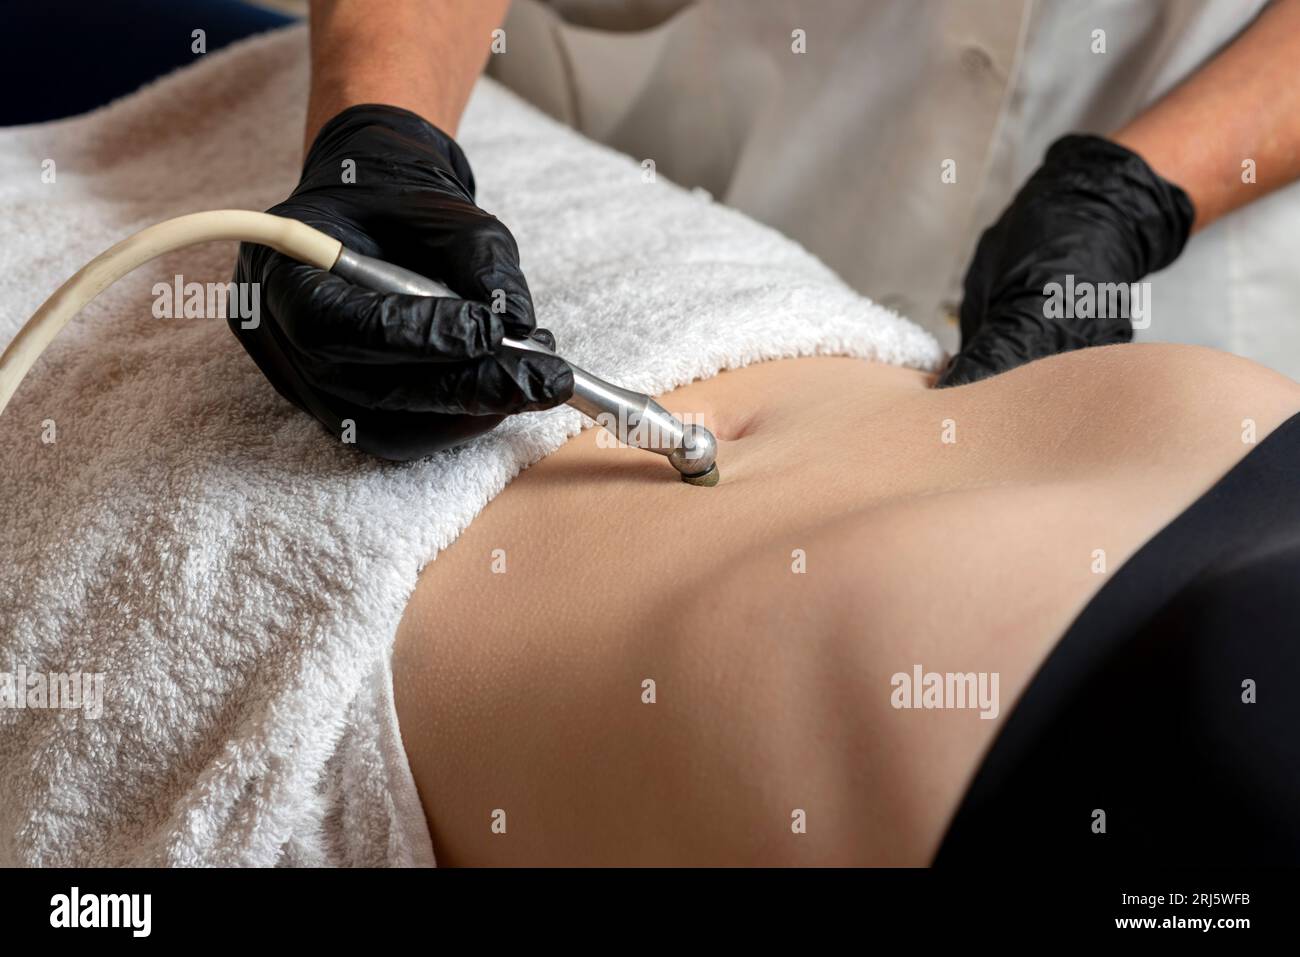 a female patient receiving a non invasive body aesthetic treatment with a diamond tip method to improve the appearance of her skin and abdomen 2RJ5WFB